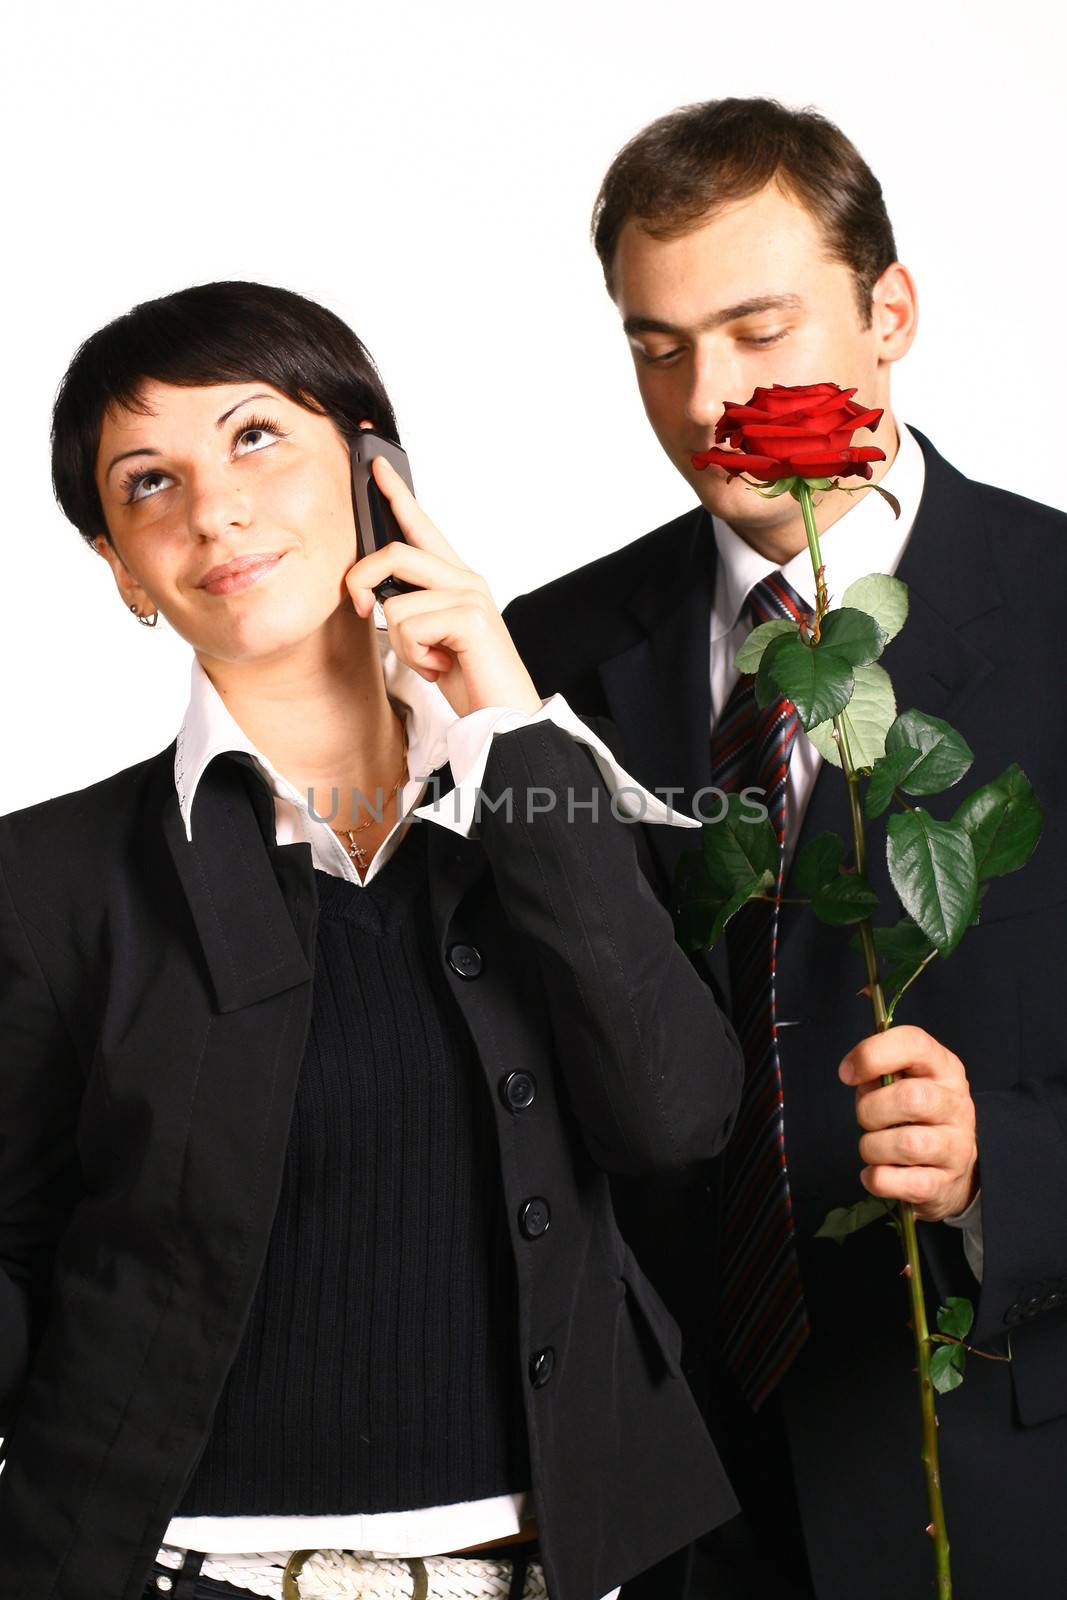 The business girl works and director tries to present it a flower